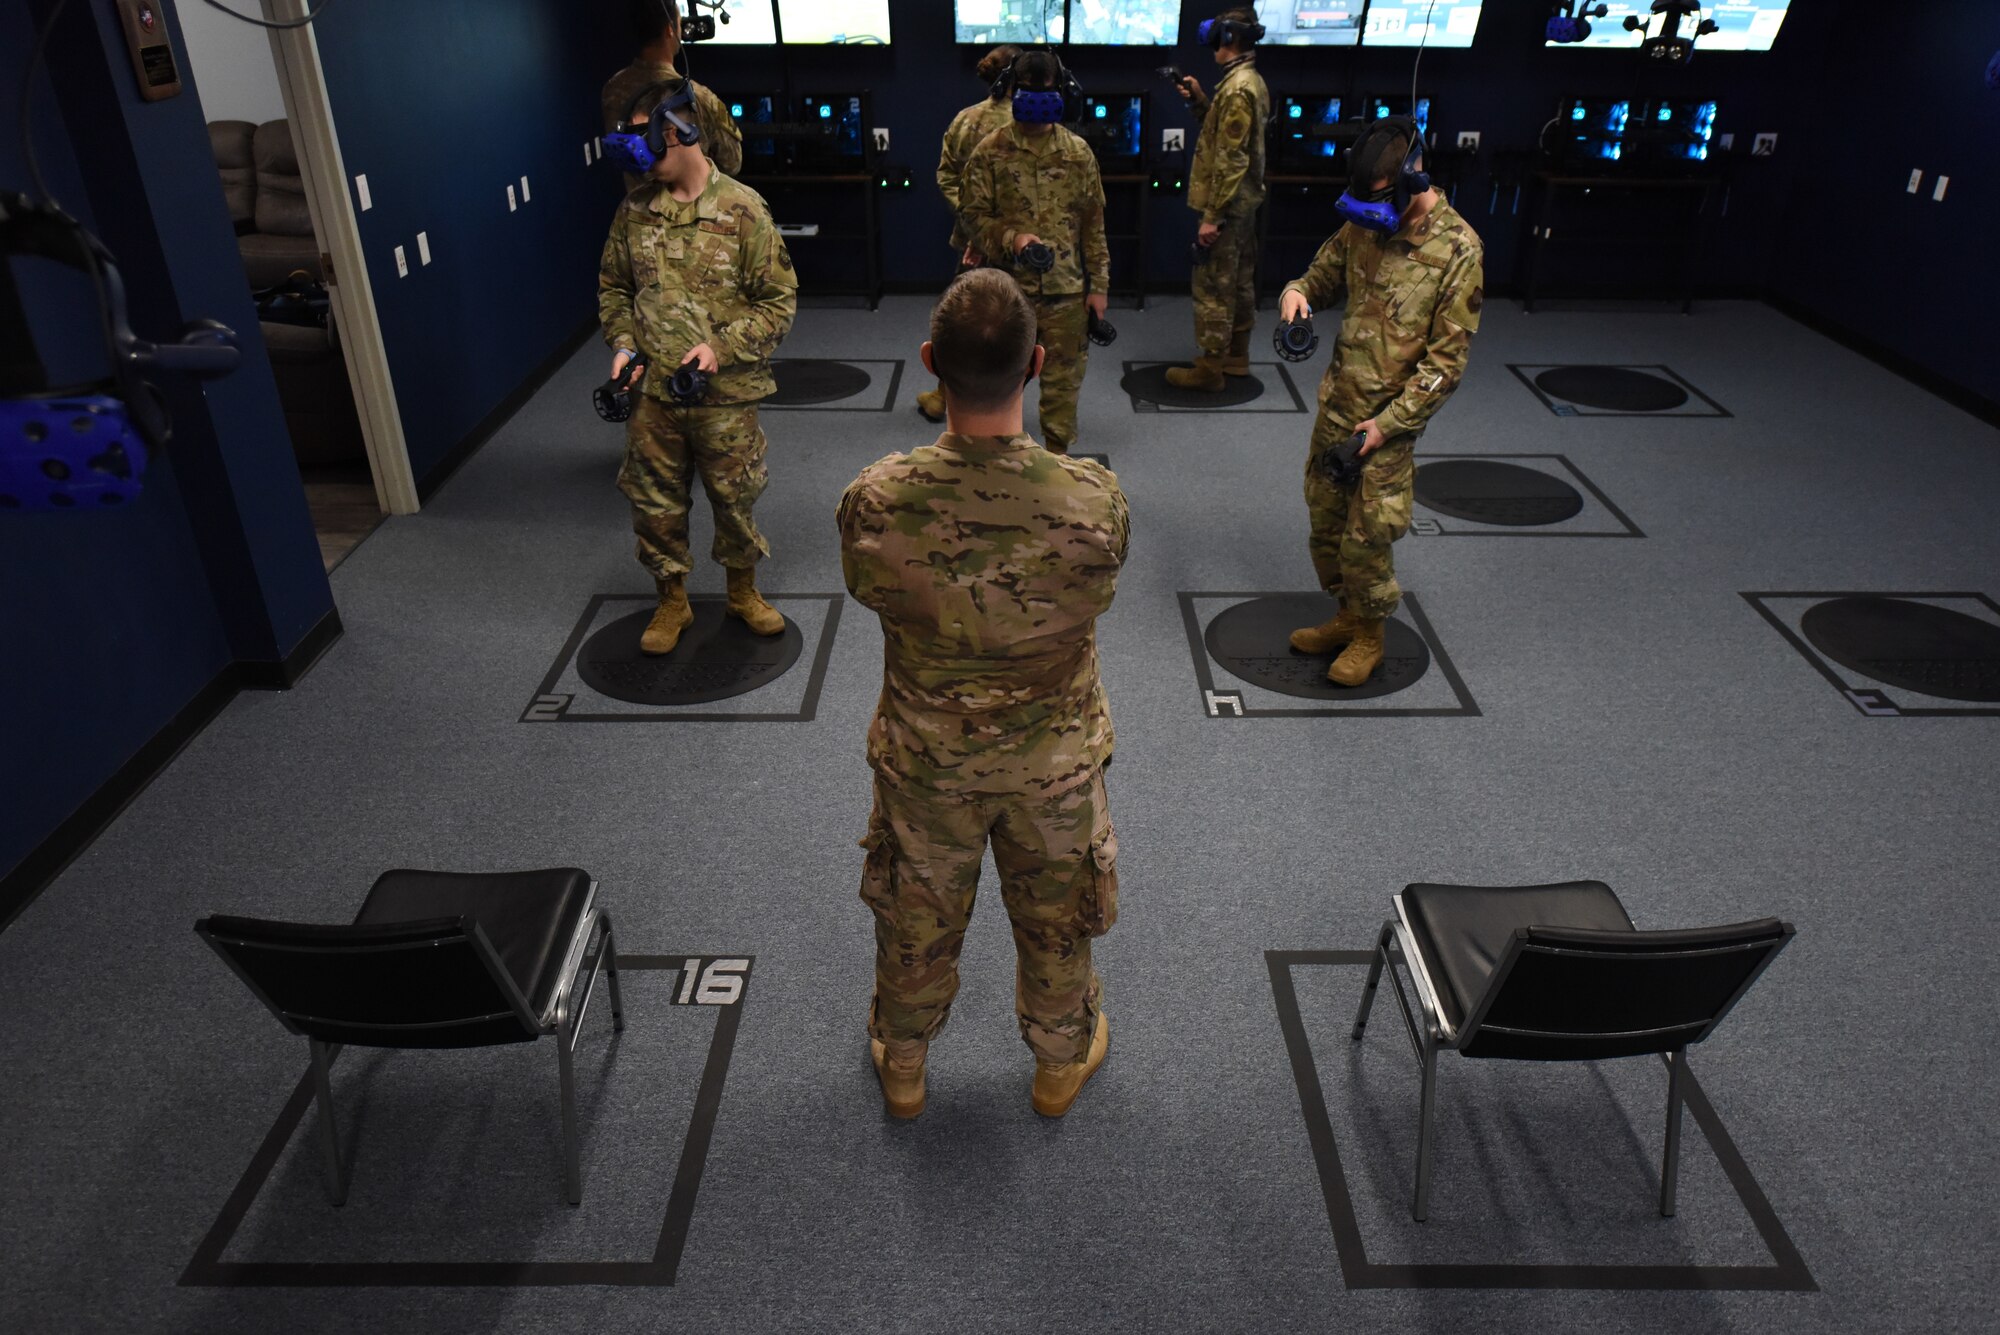 Air Force sergeant monitors virtual reality training session